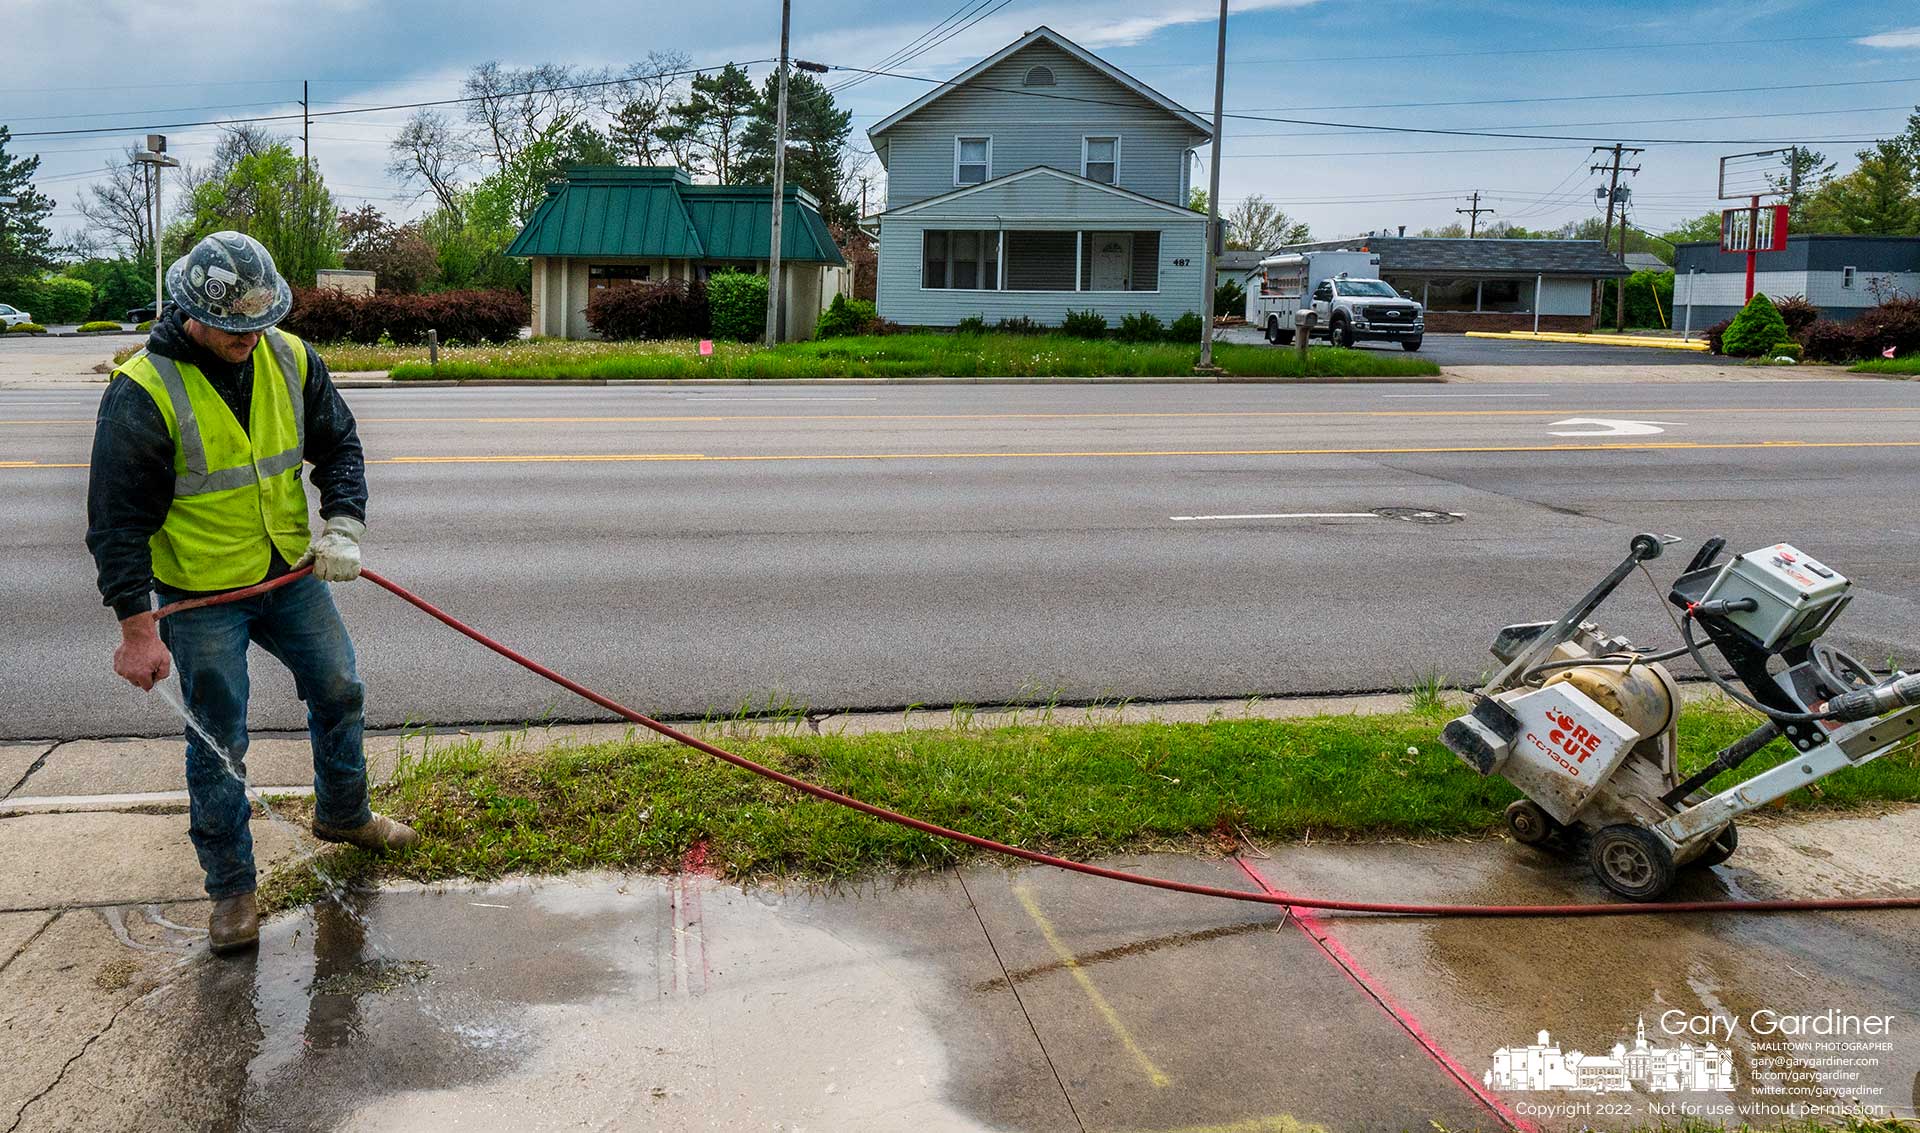 A worker cleans away wet concrete dust created when he cut sections of the sidewalk where Columbia Gas will disconnect three buildings across the street to make way for a Dunkin doughnut drive-thru restaurant. My Final Photo for May 3, 2022.